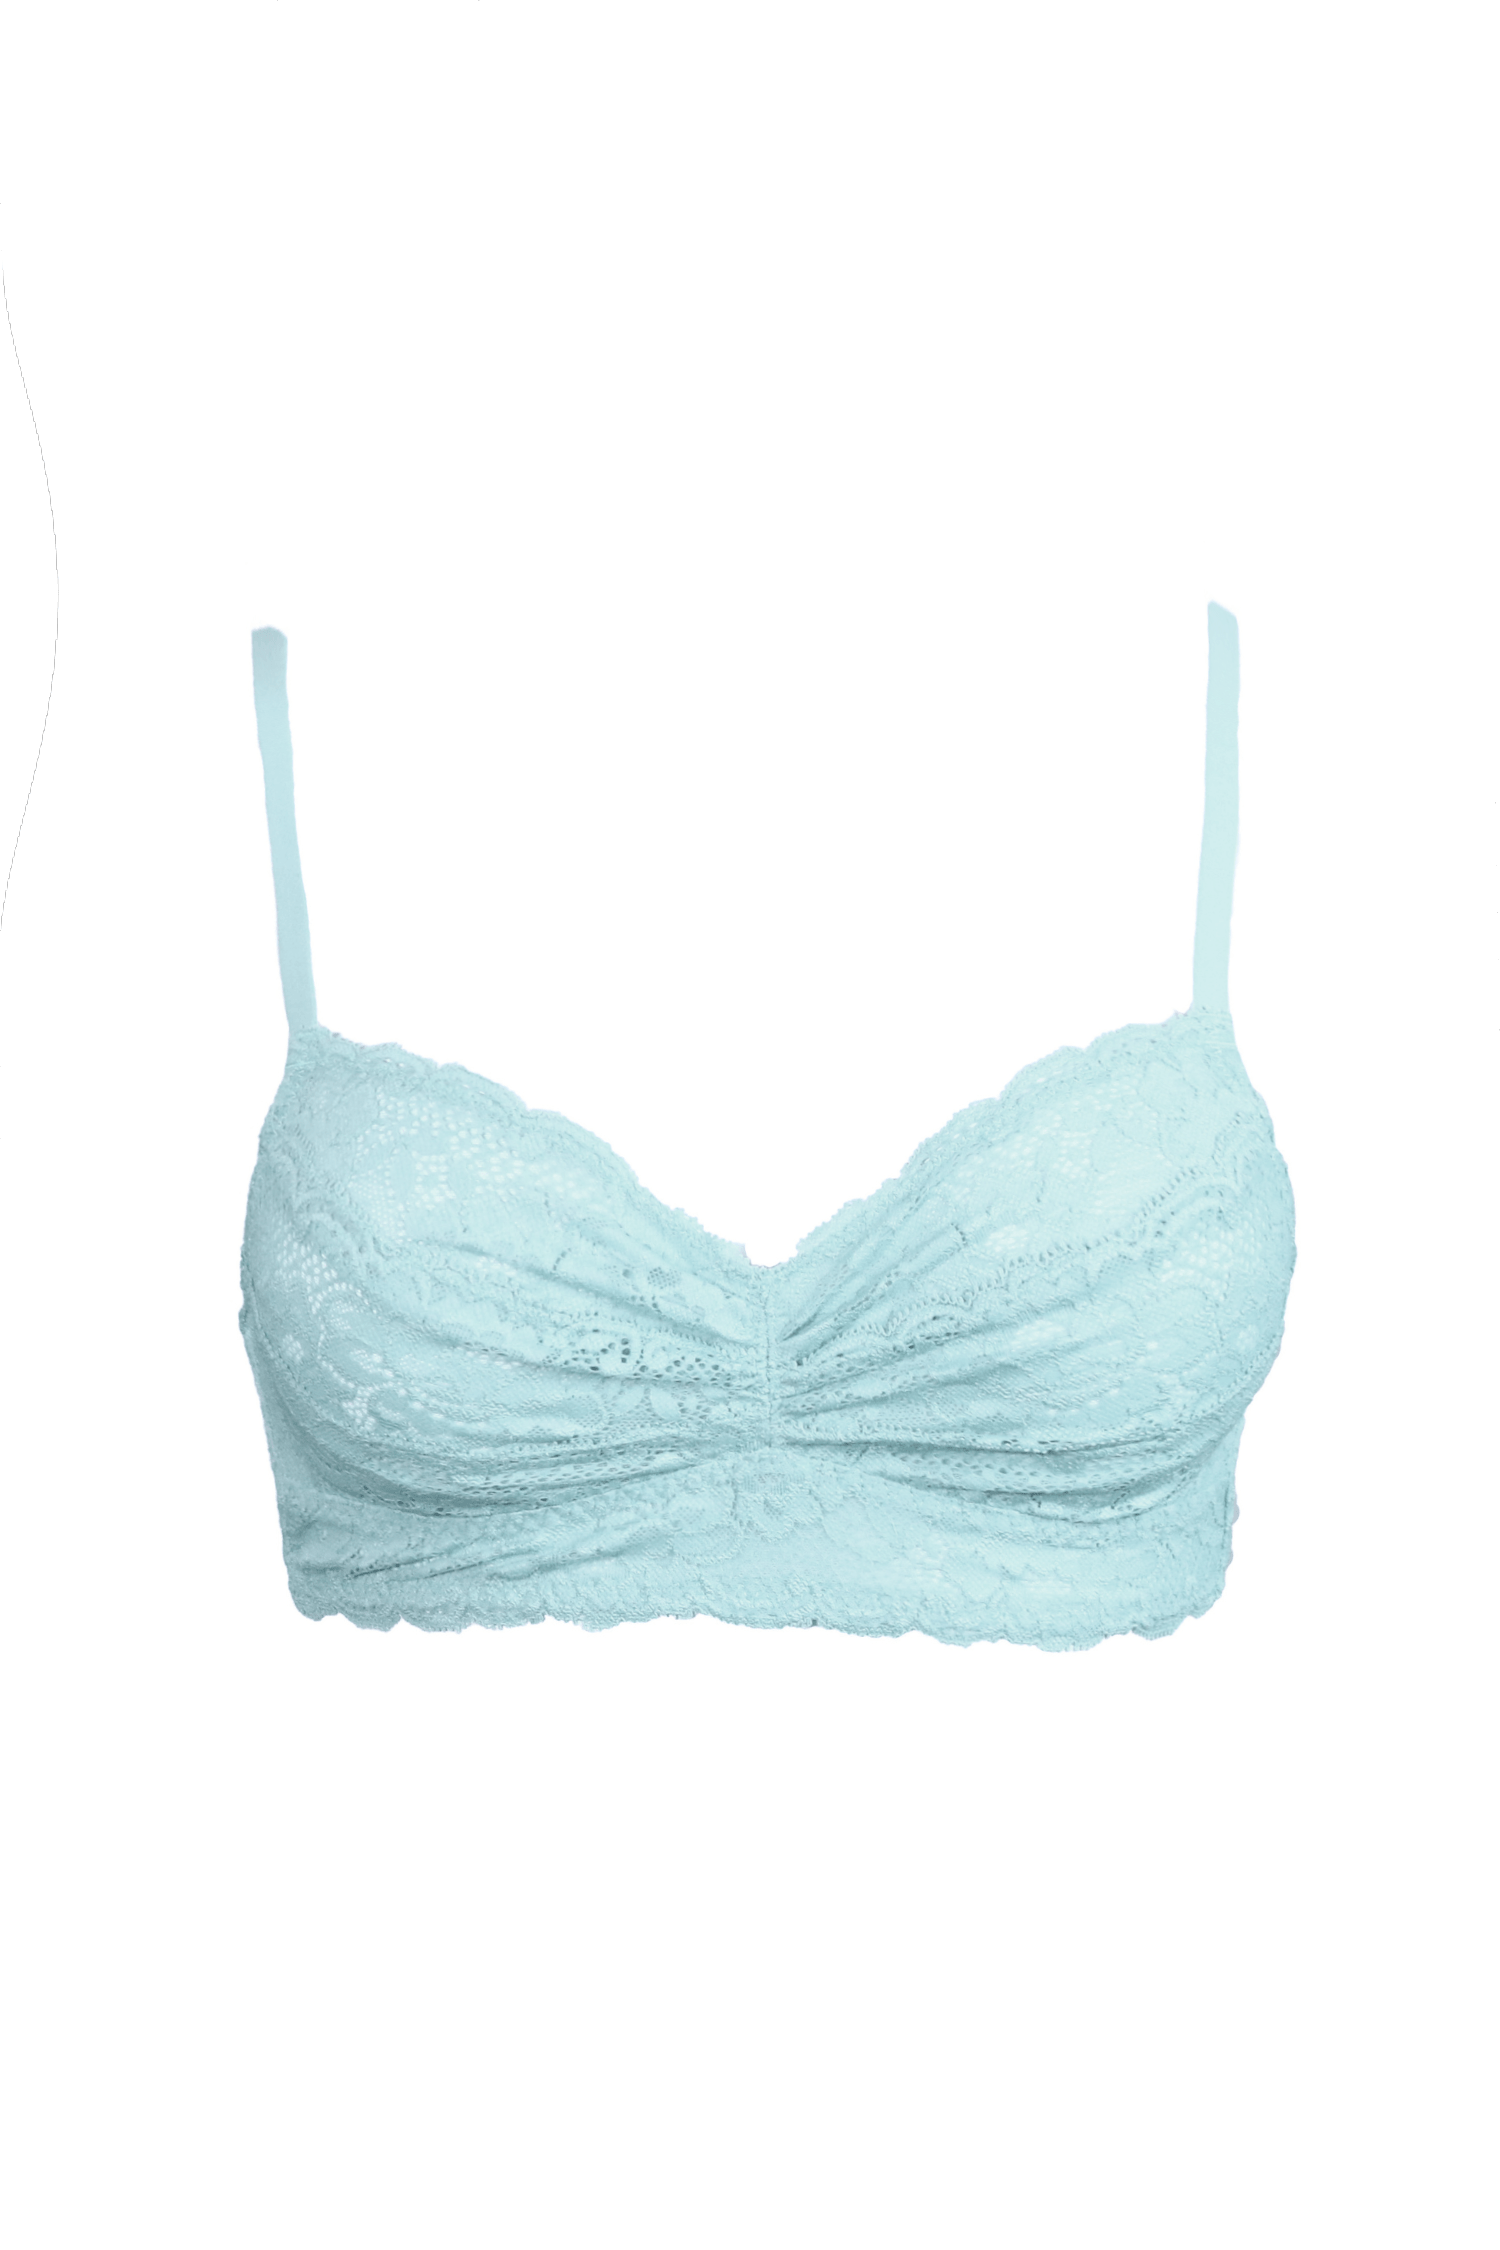 Montelle pink Cup Sized Bralette